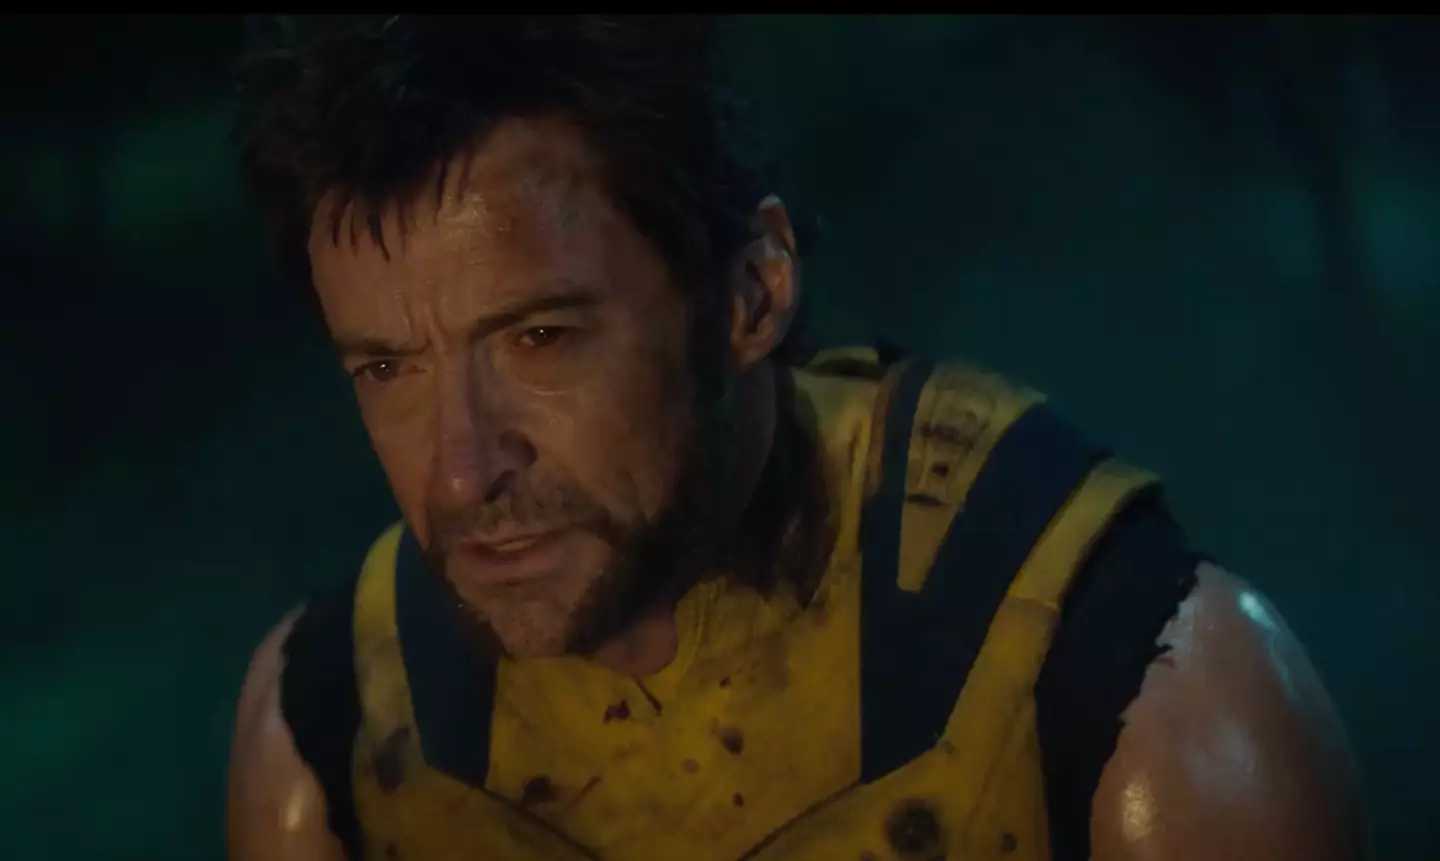 Jackman's Wolverine appears to be a variant of the character we've come to know and love. (Marvel Studios)